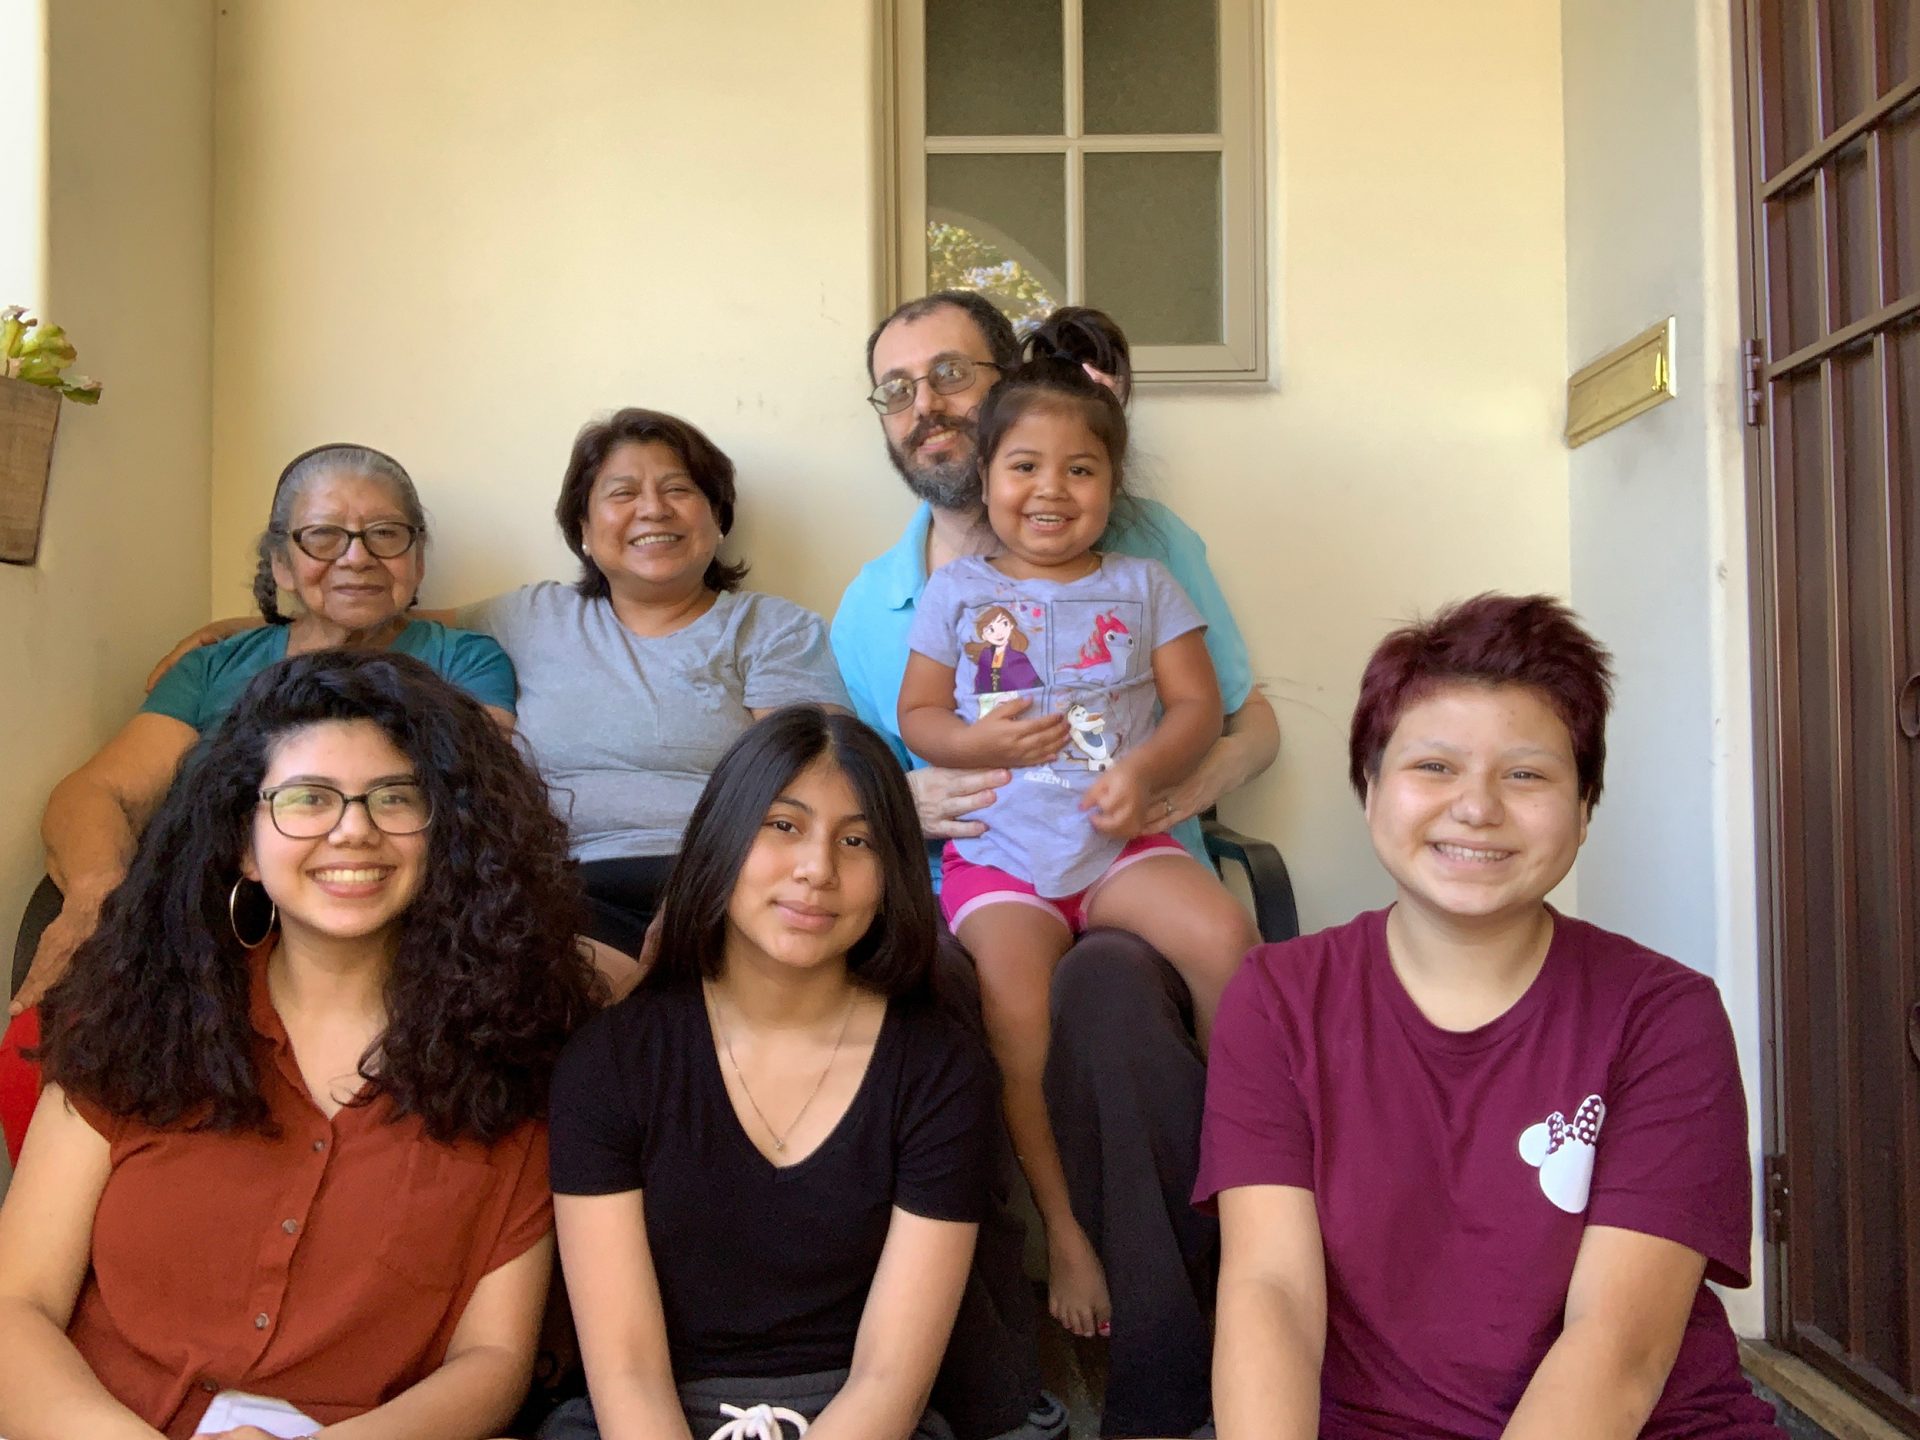 Maria Hernandez (top row, second from left) and her extended family live together in Los Angeles. When she was diagnosed with the coronavirus, she self-isolated in an upstairs bedroom.